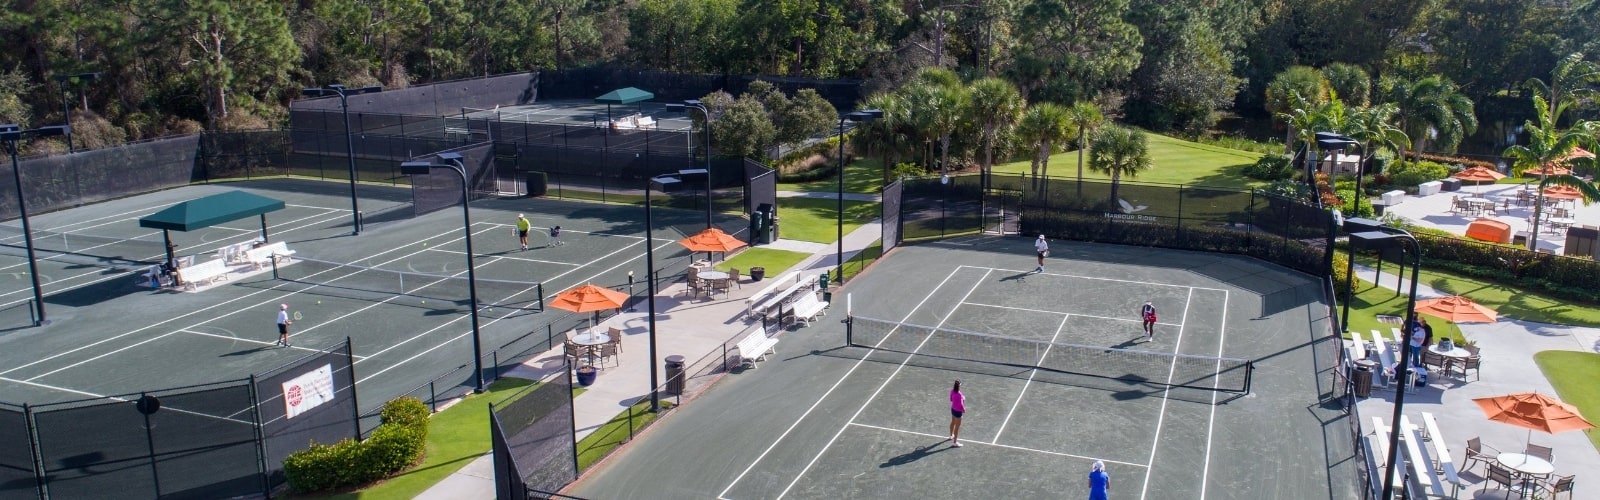 Find Out Why Tennis at Private Clubs is Gaining Popularity